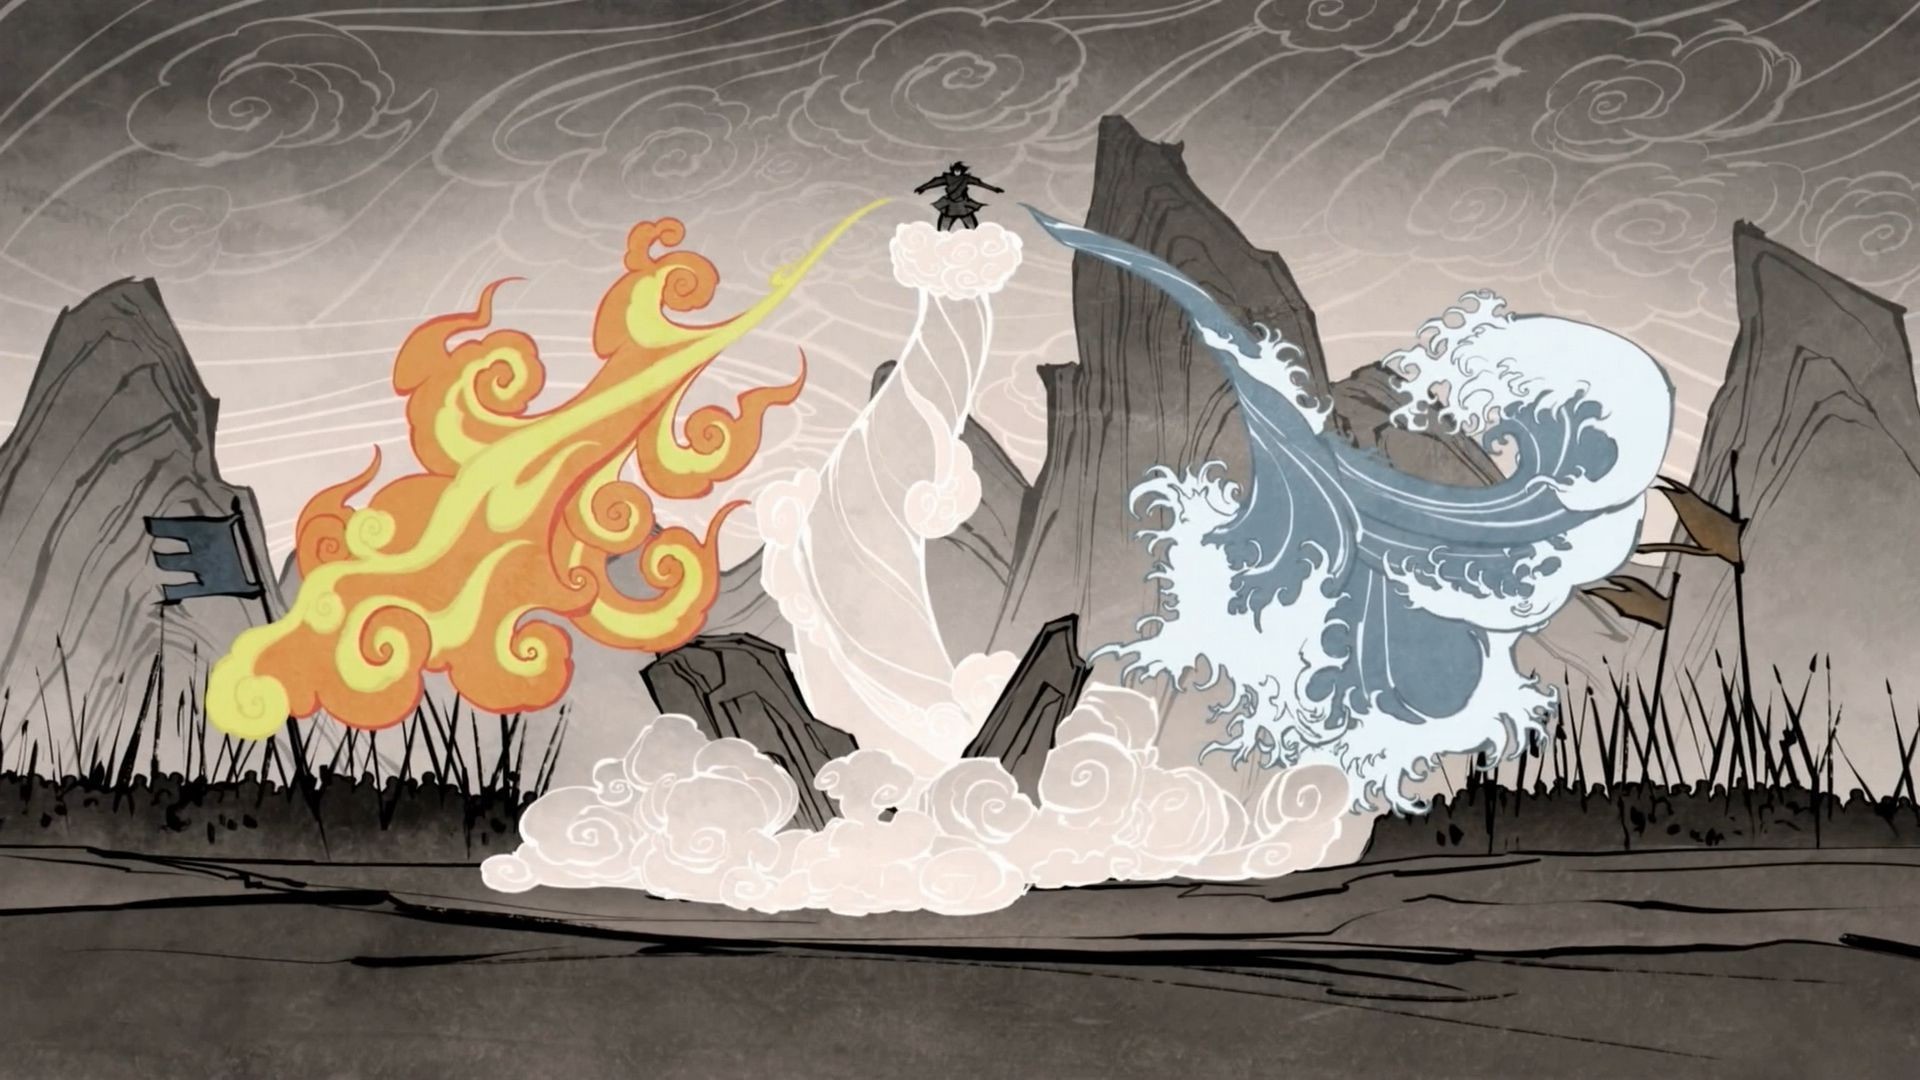 Avatar the Last Airbender Wallpaper 73 images